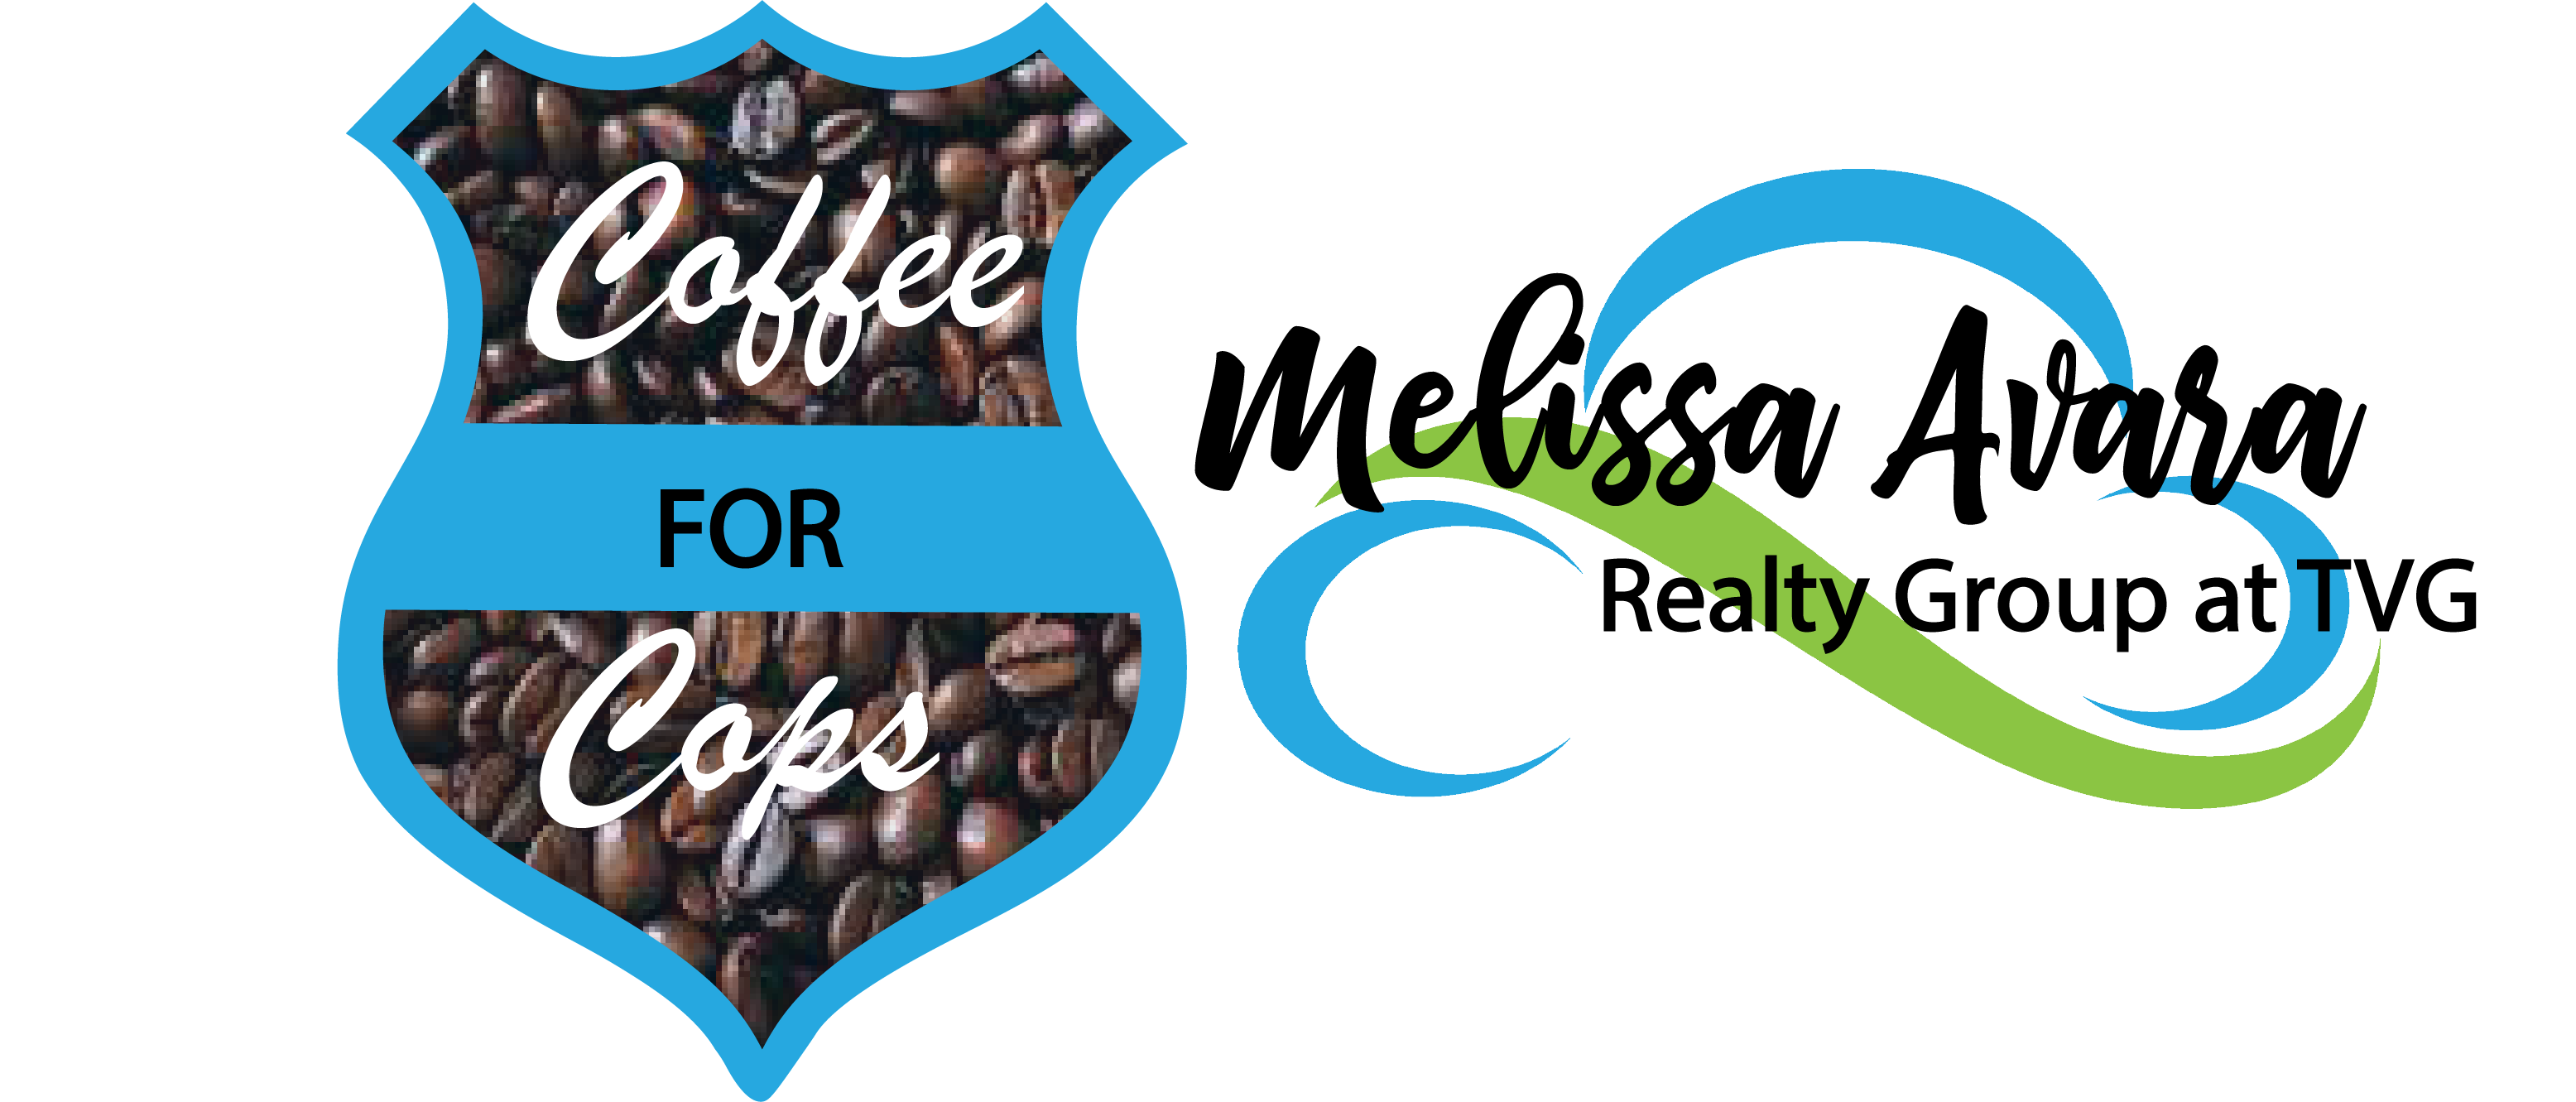 3rd Annual Coffee for Cops Charity Golf Tournament